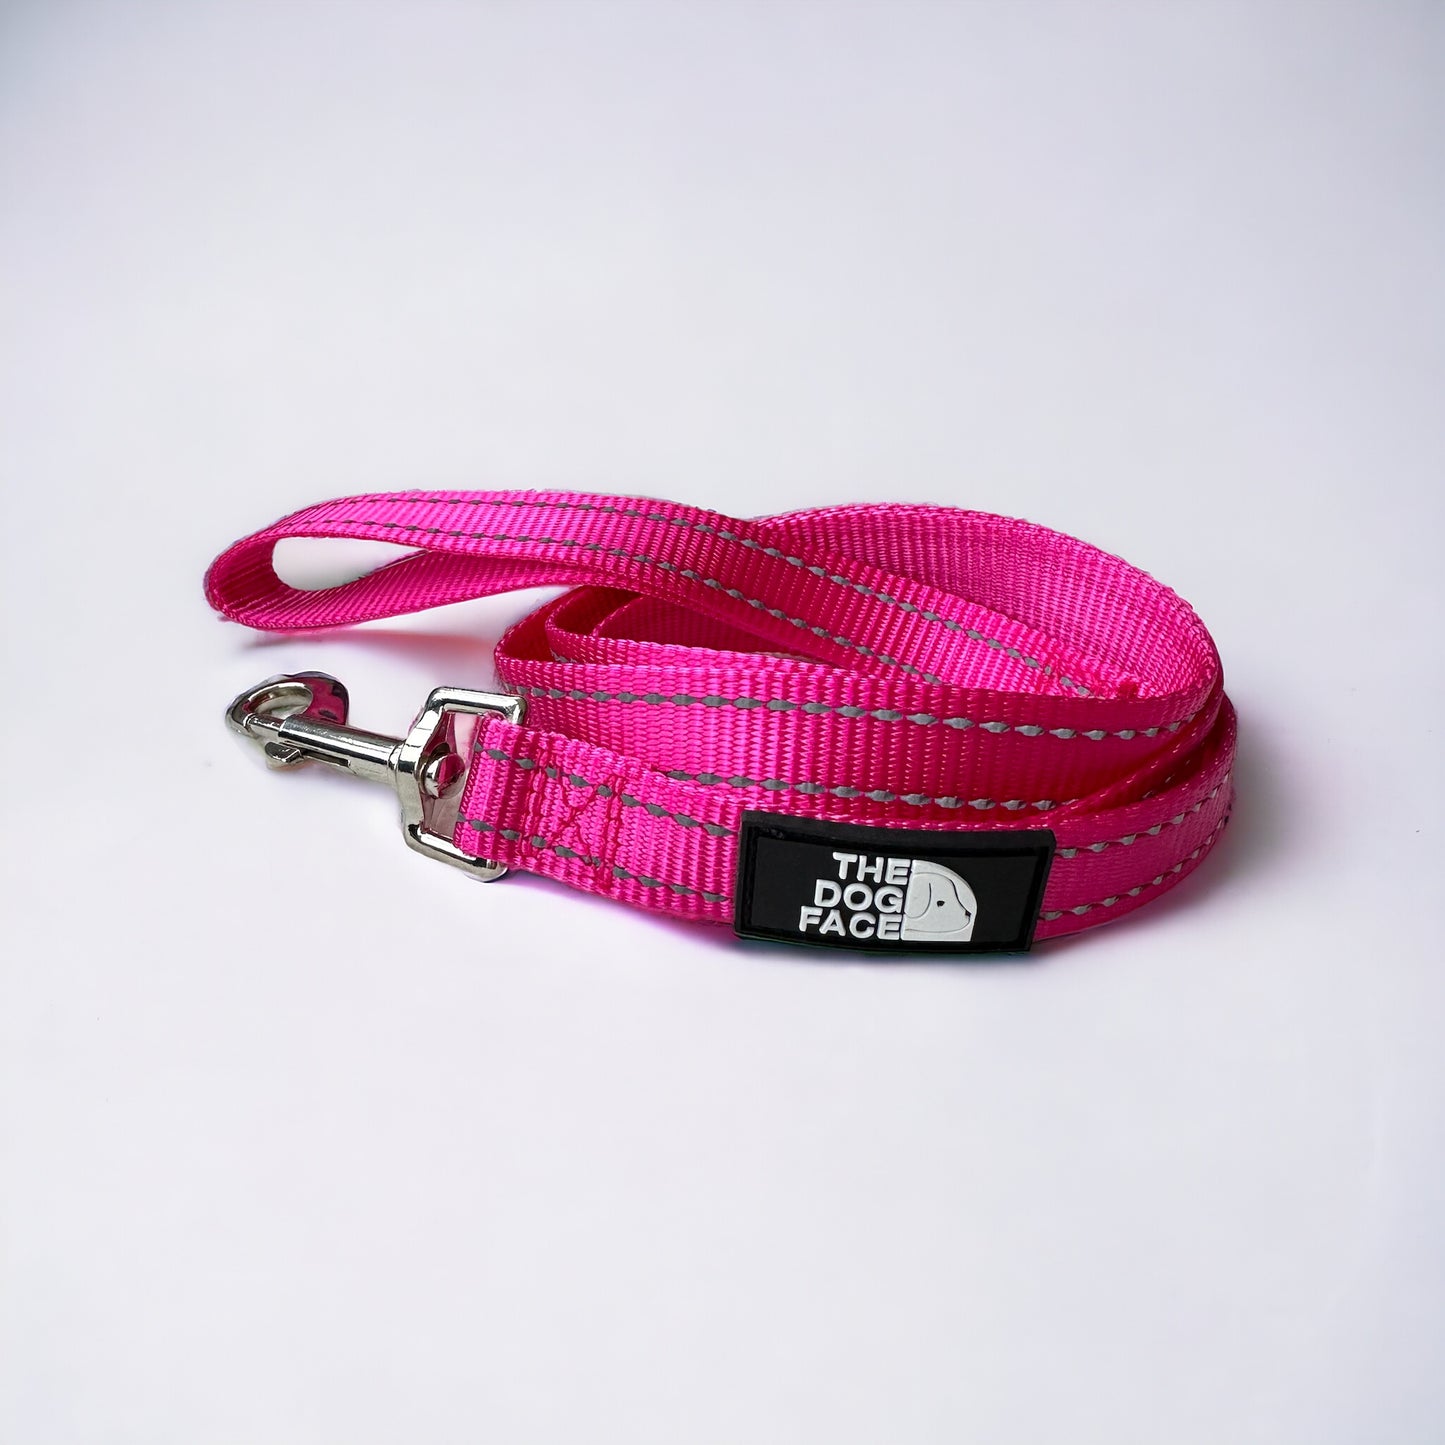 The Dog Face Leash - Pink